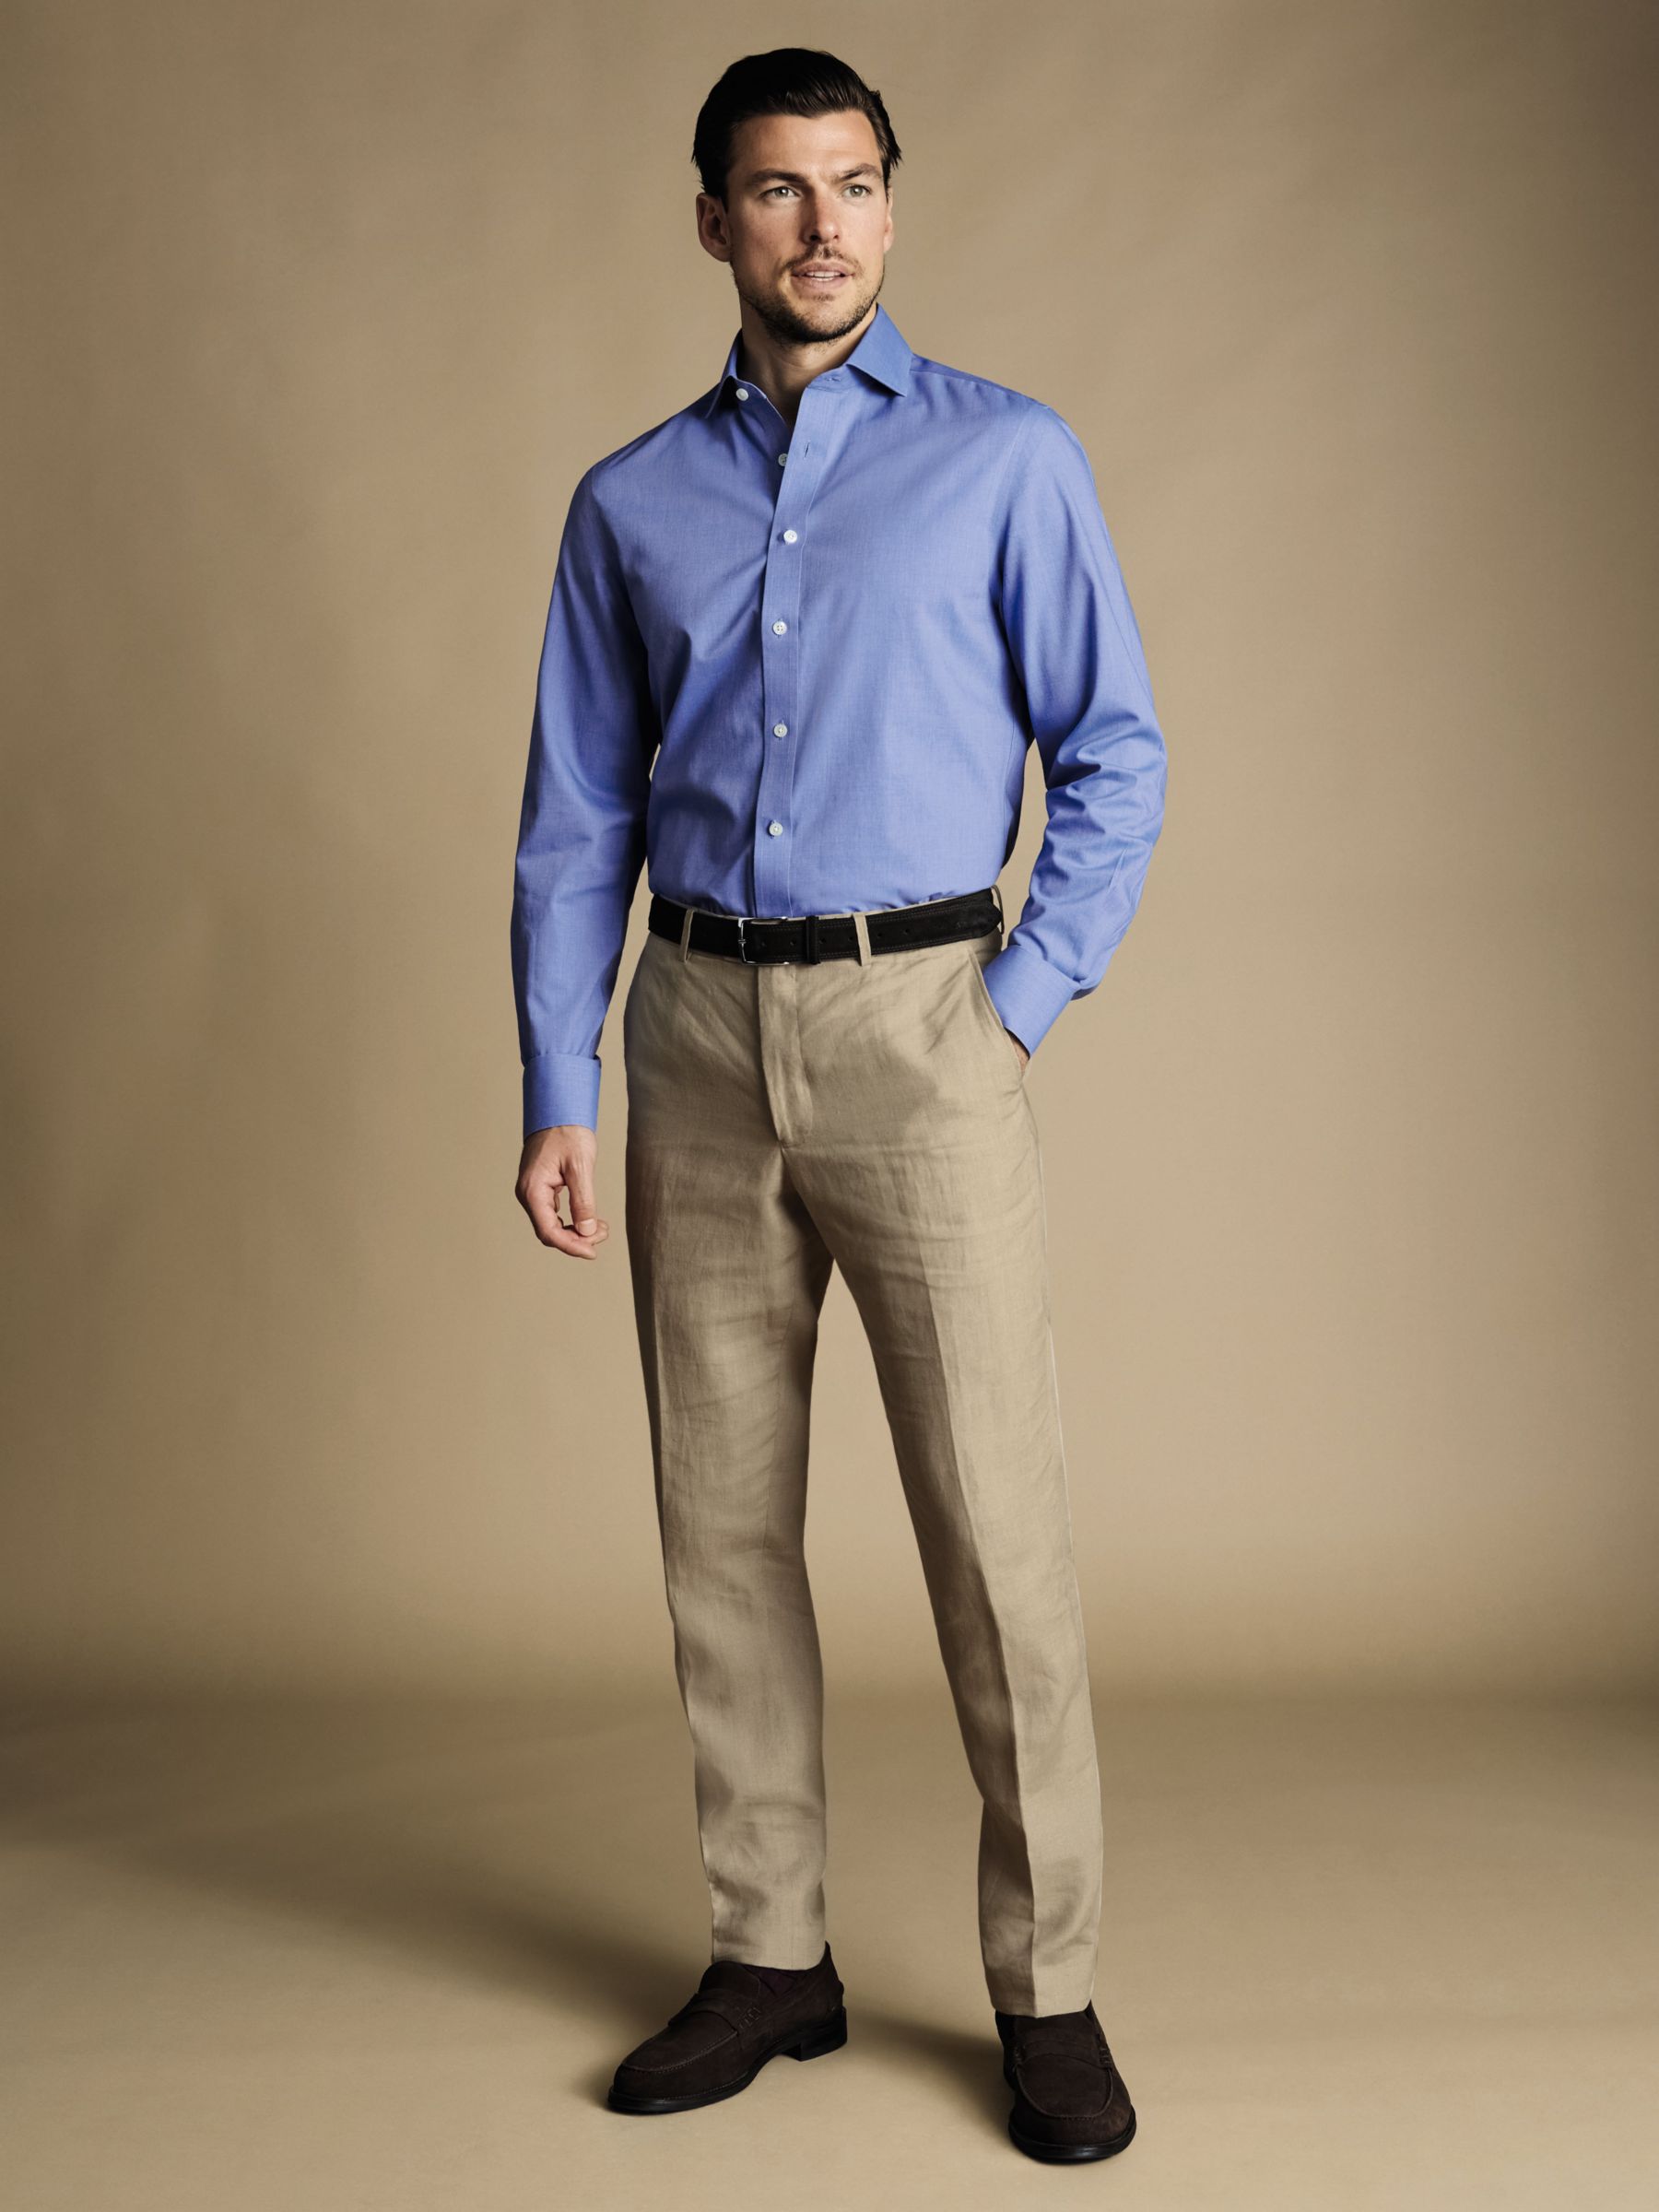 Buy Charles Tyrwhitt Linen Slim Fit Trousers, Taupe Online at johnlewis.com